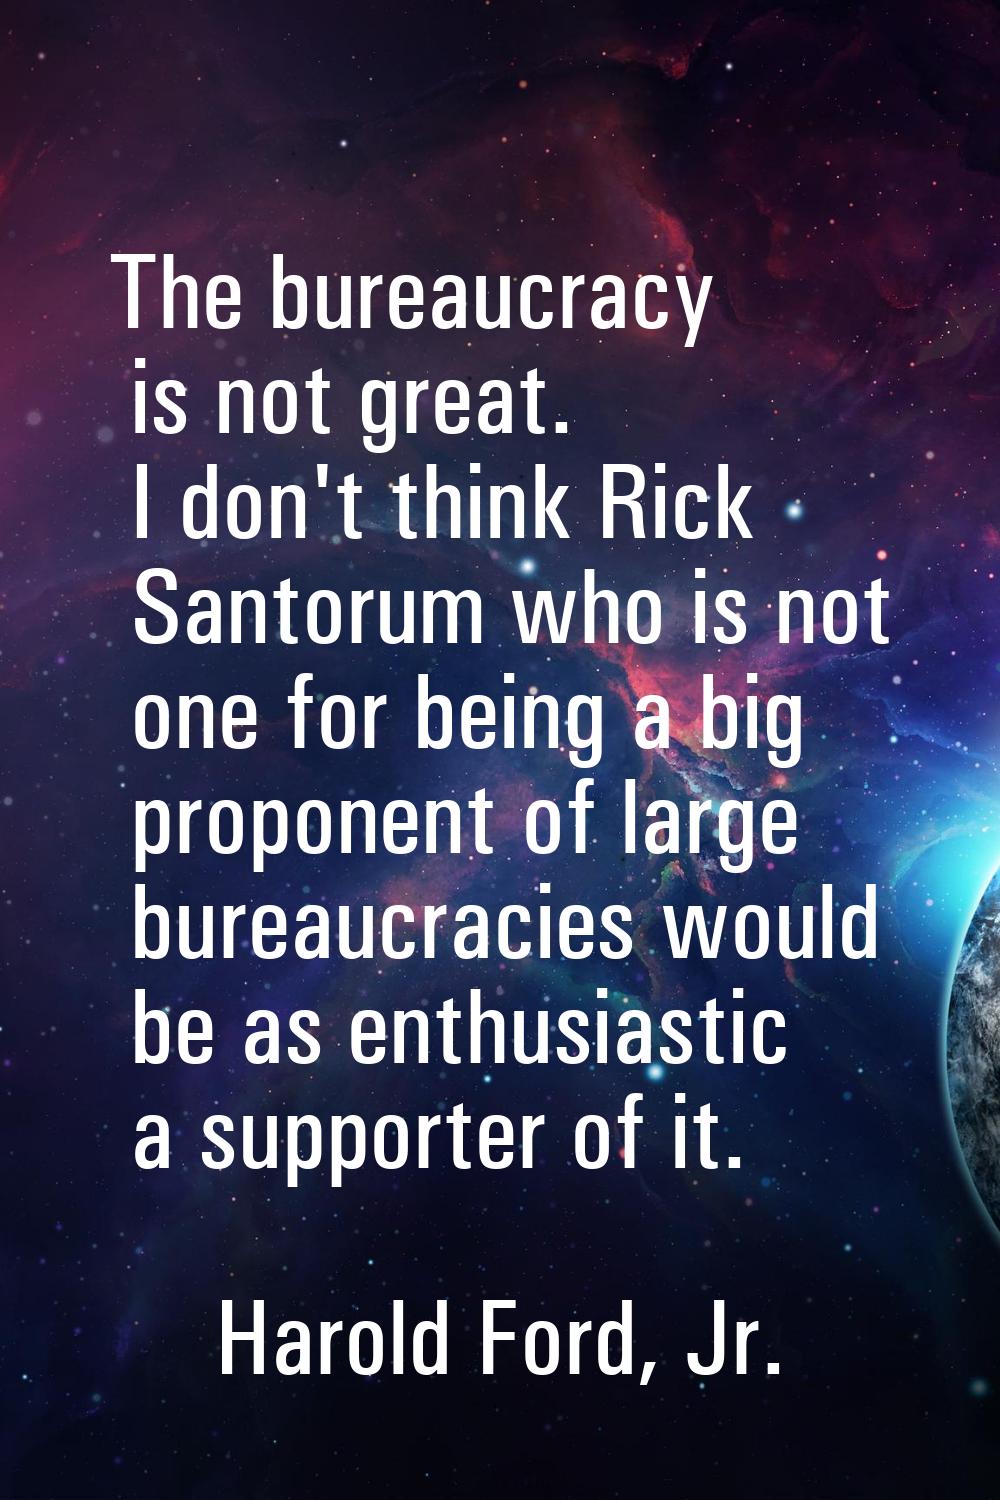 The bureaucracy is not great. I don't think Rick Santorum who is not one for being a big proponent 